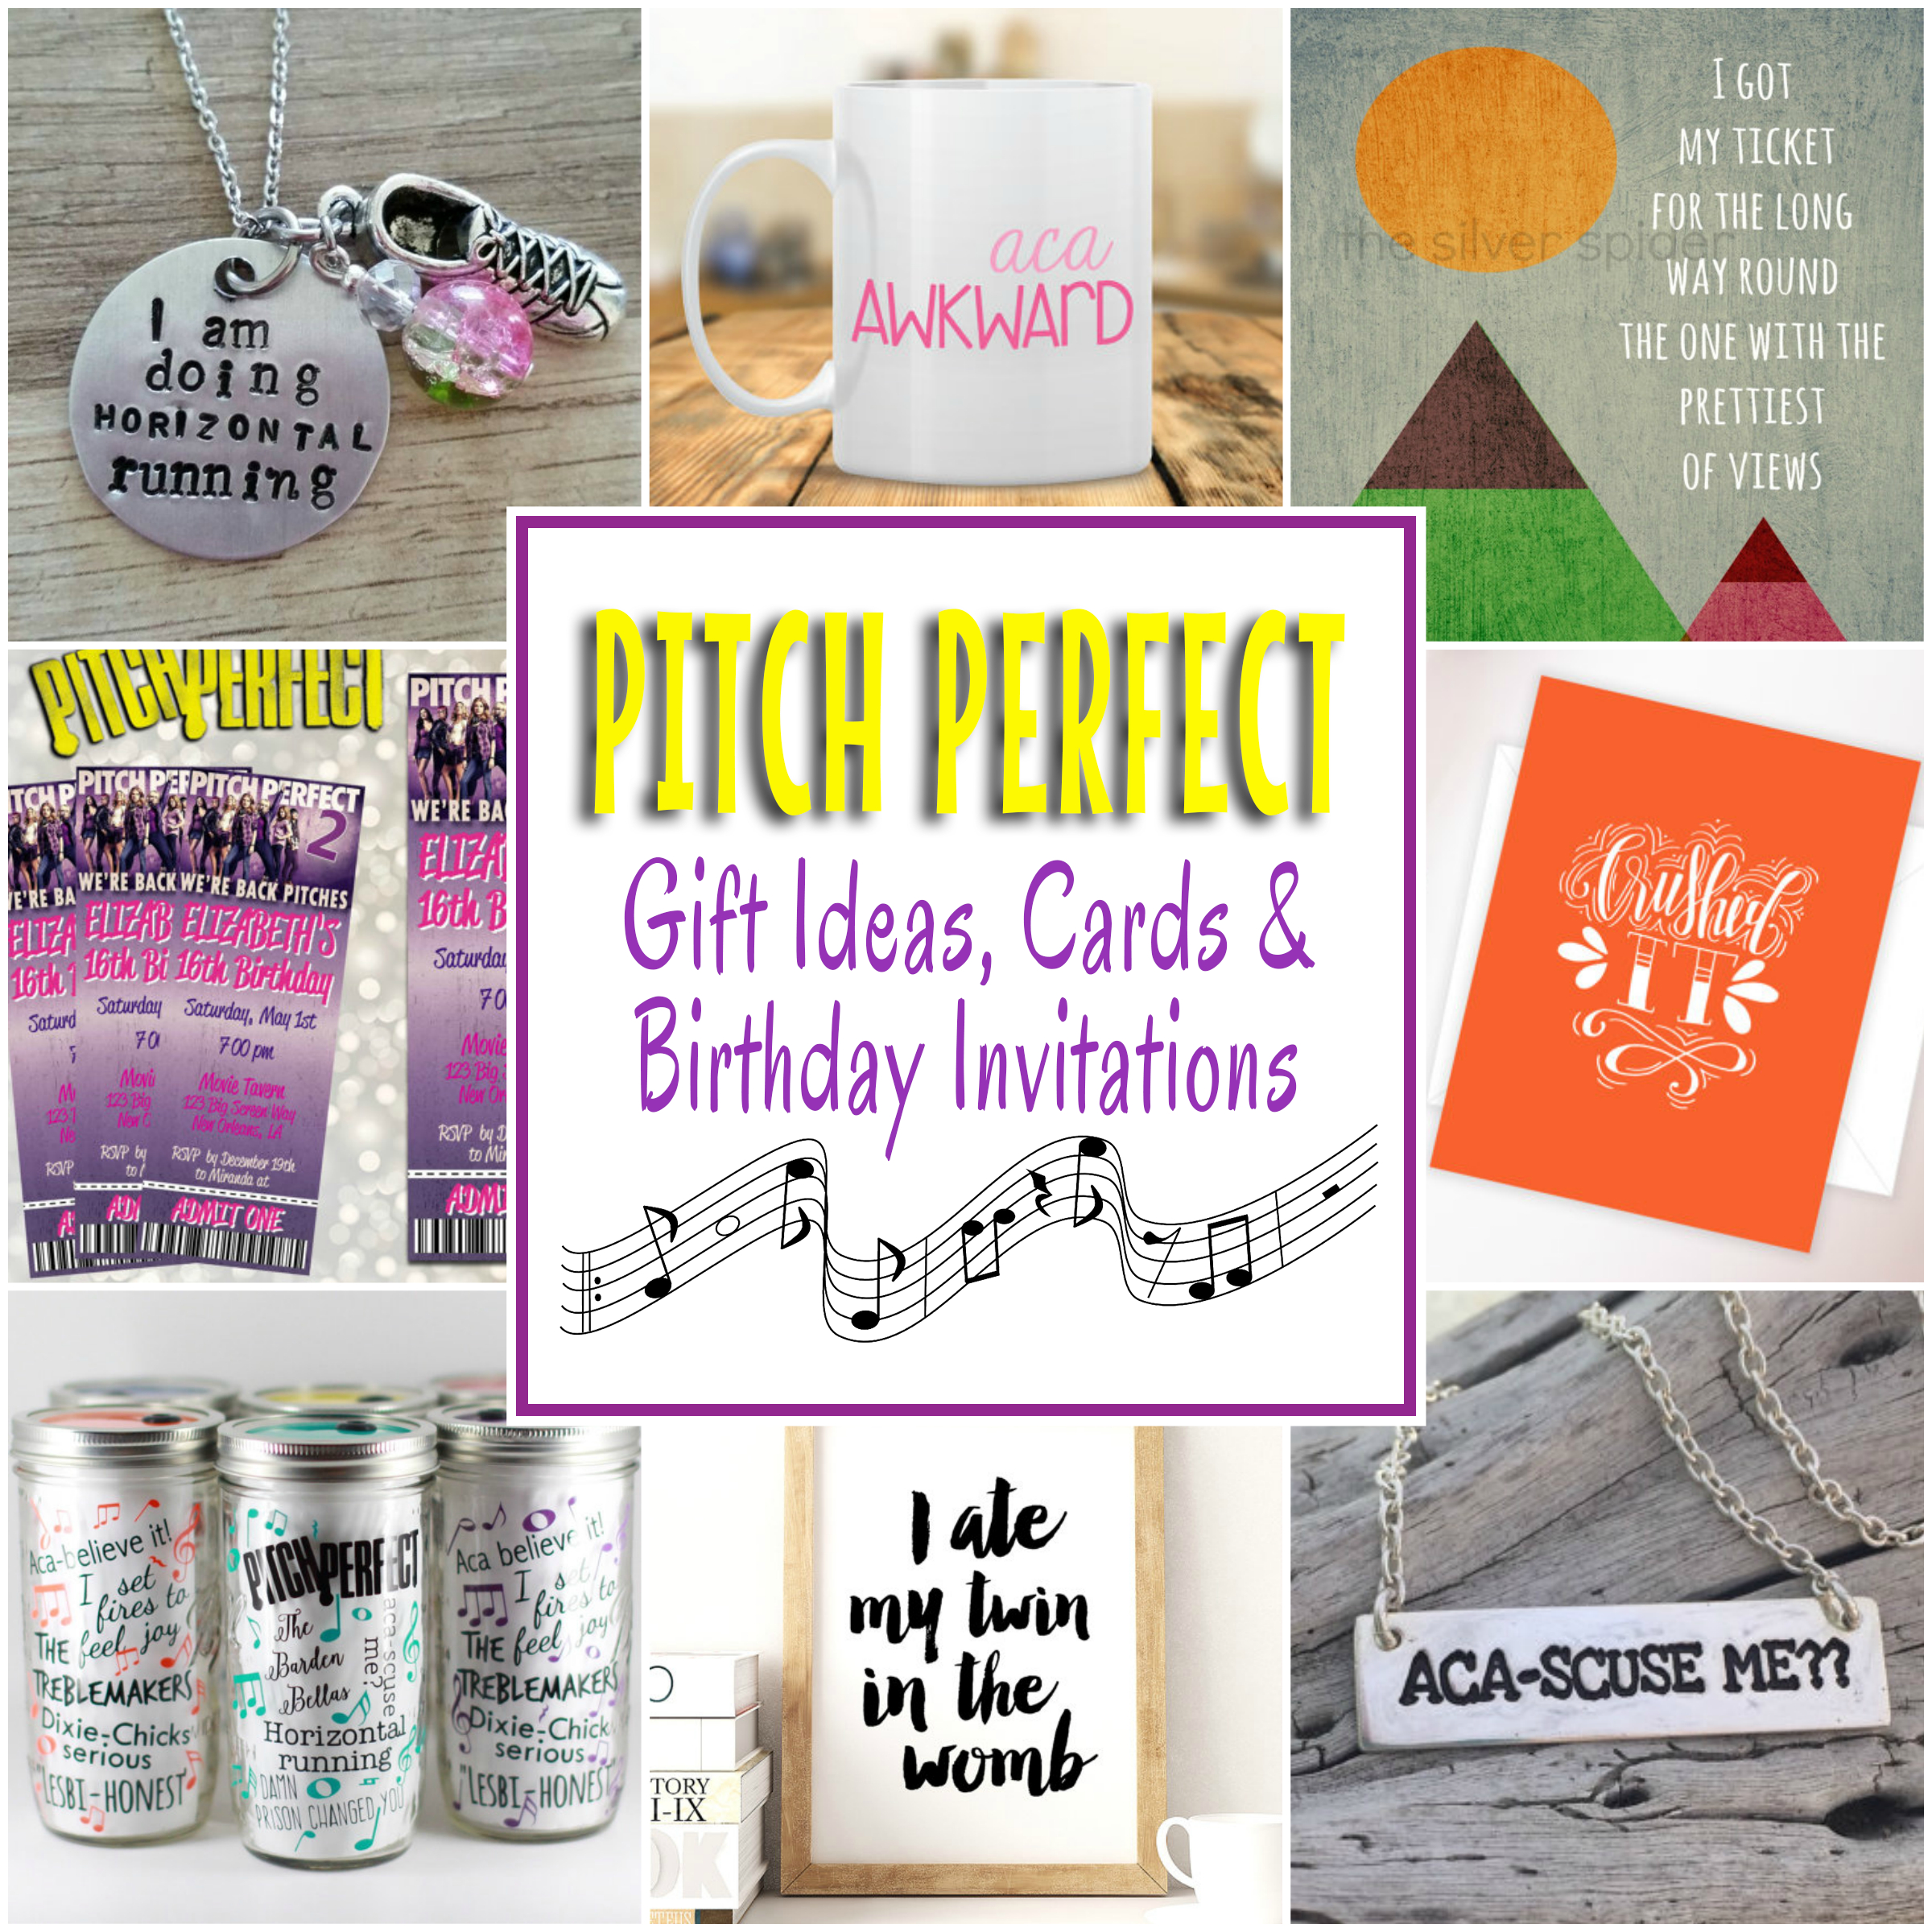 Giant Birthday Card Ideas Pitch Perfect Gifts Cards And Birthday Party Invitations Raising